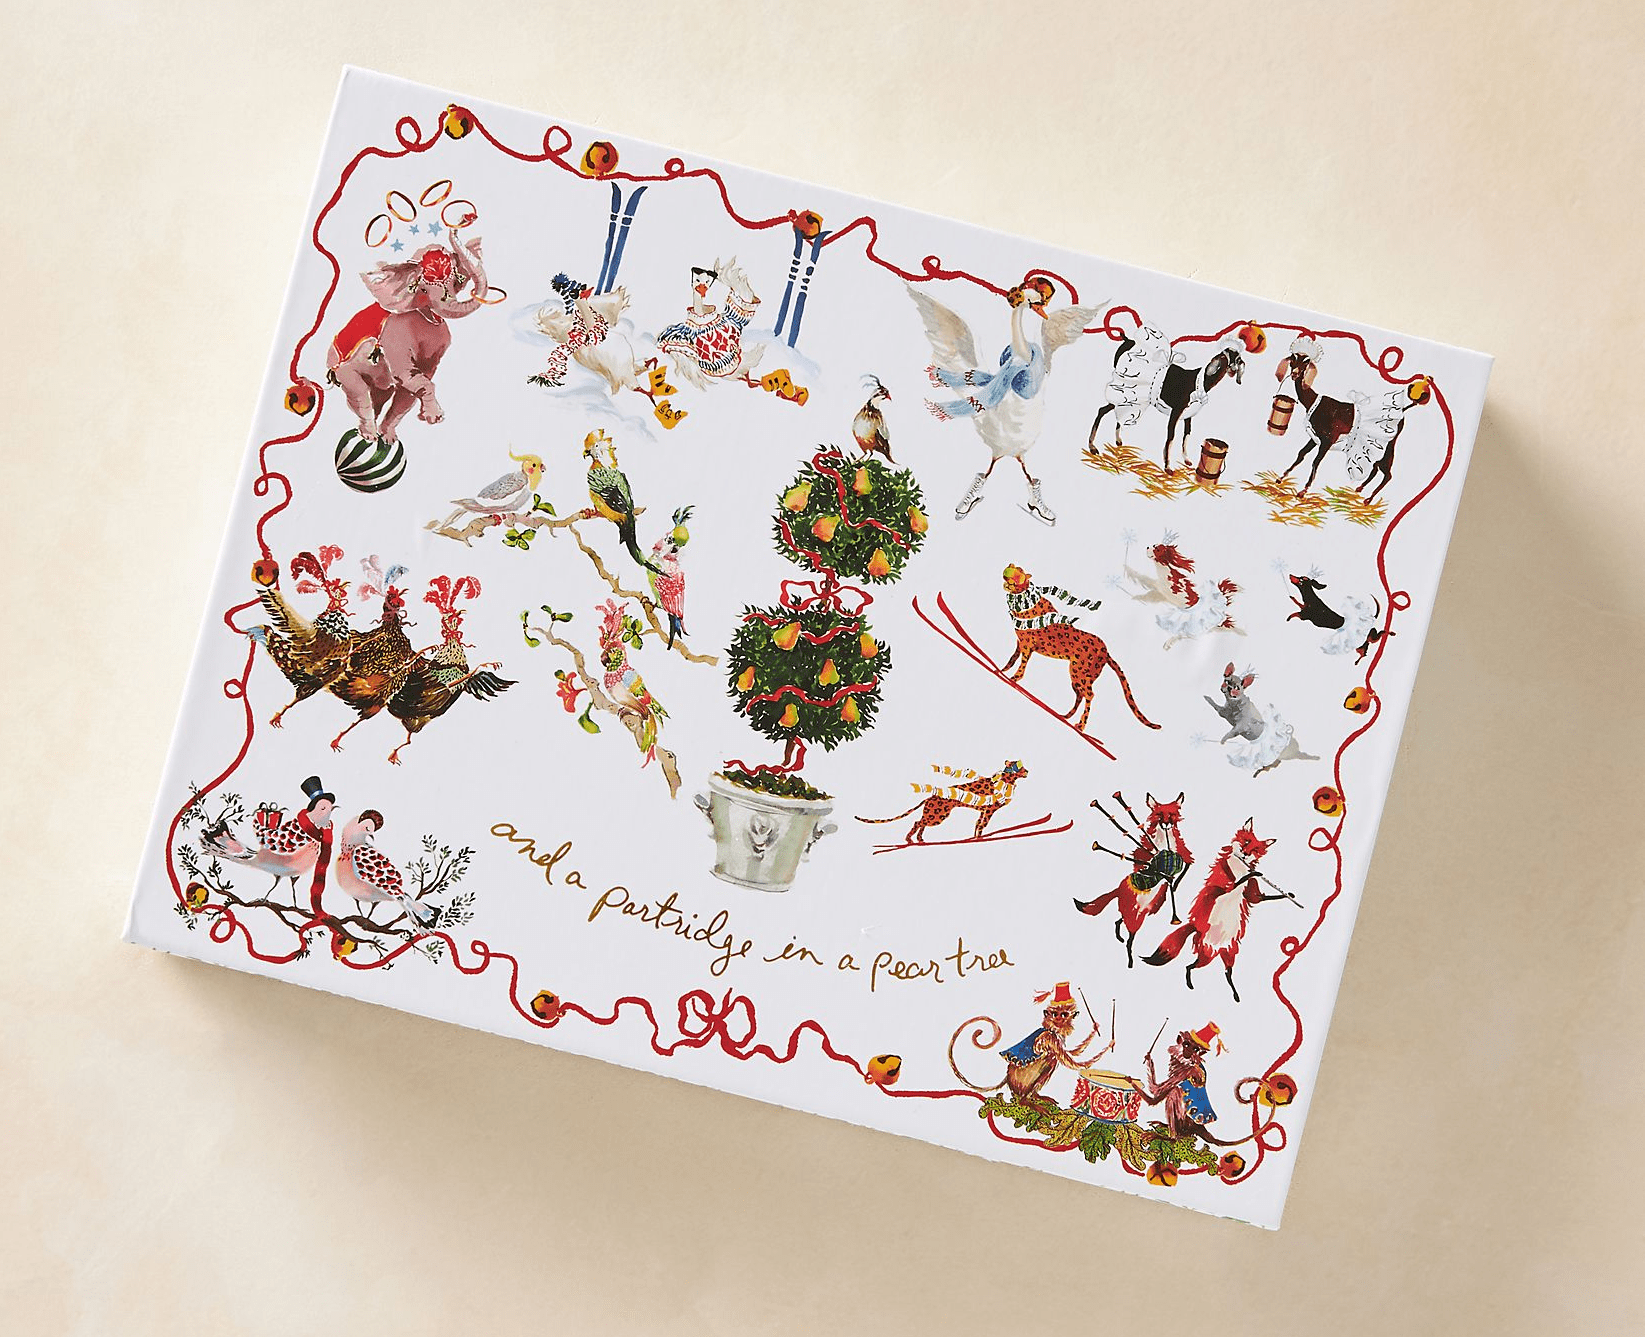 2020 Anthropologie Inslee Fariss Candle Advent Calendar Available Now